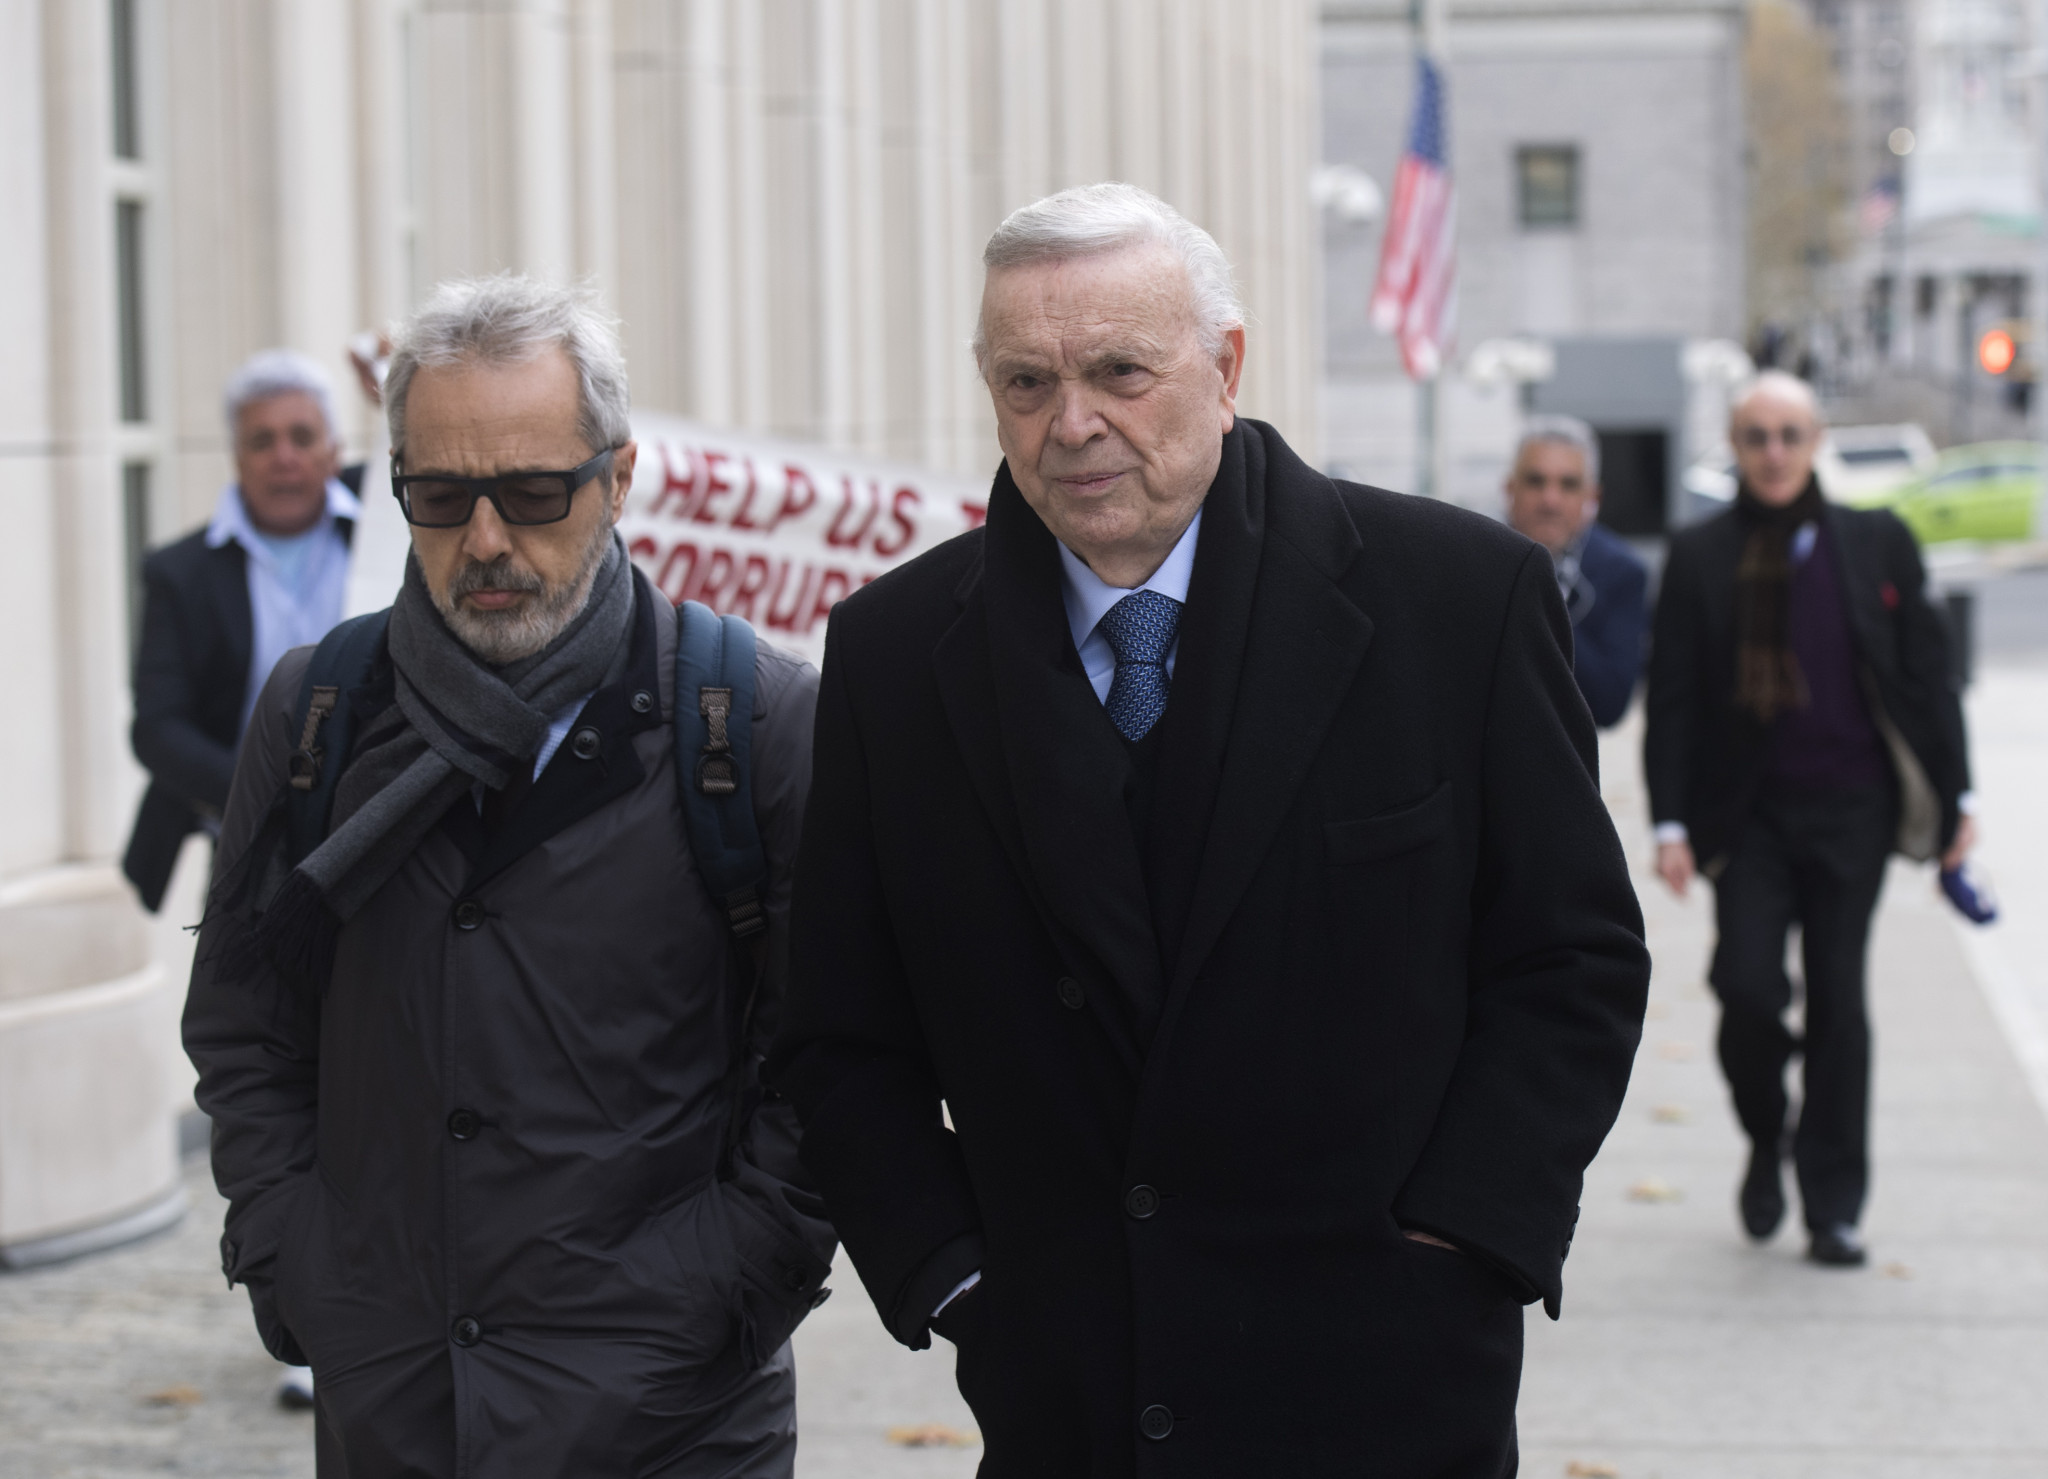  Jose Maria Marin, right, has been sentenced to four years in prison ©Getty Images